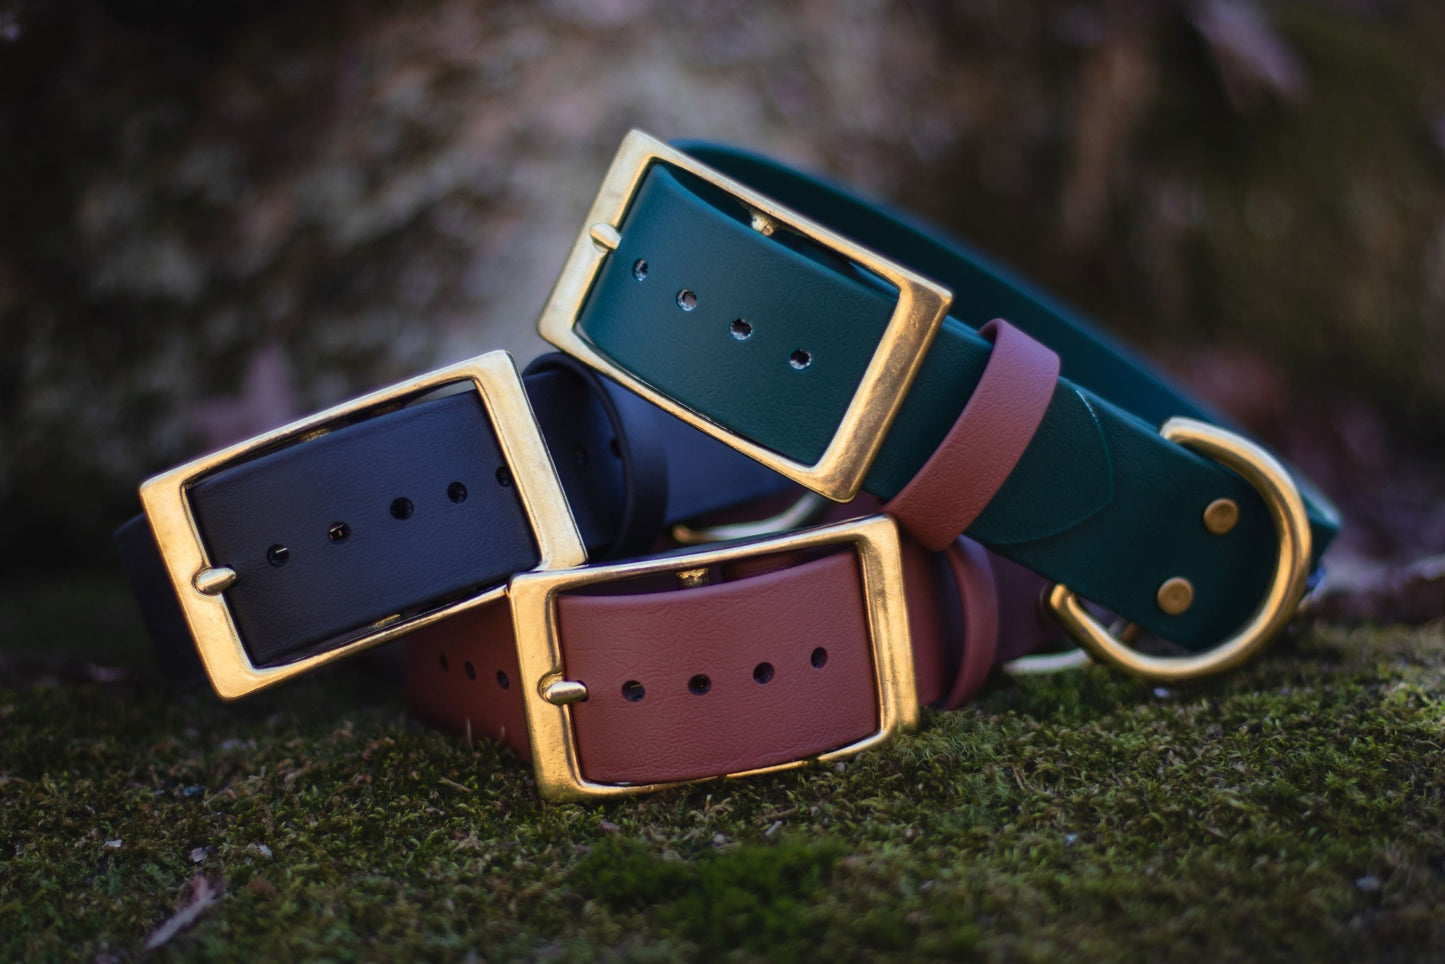 Backwoods Dog 1.5" waterproof biothane jumbo brass buckle dog collar in black, forest green, and brown